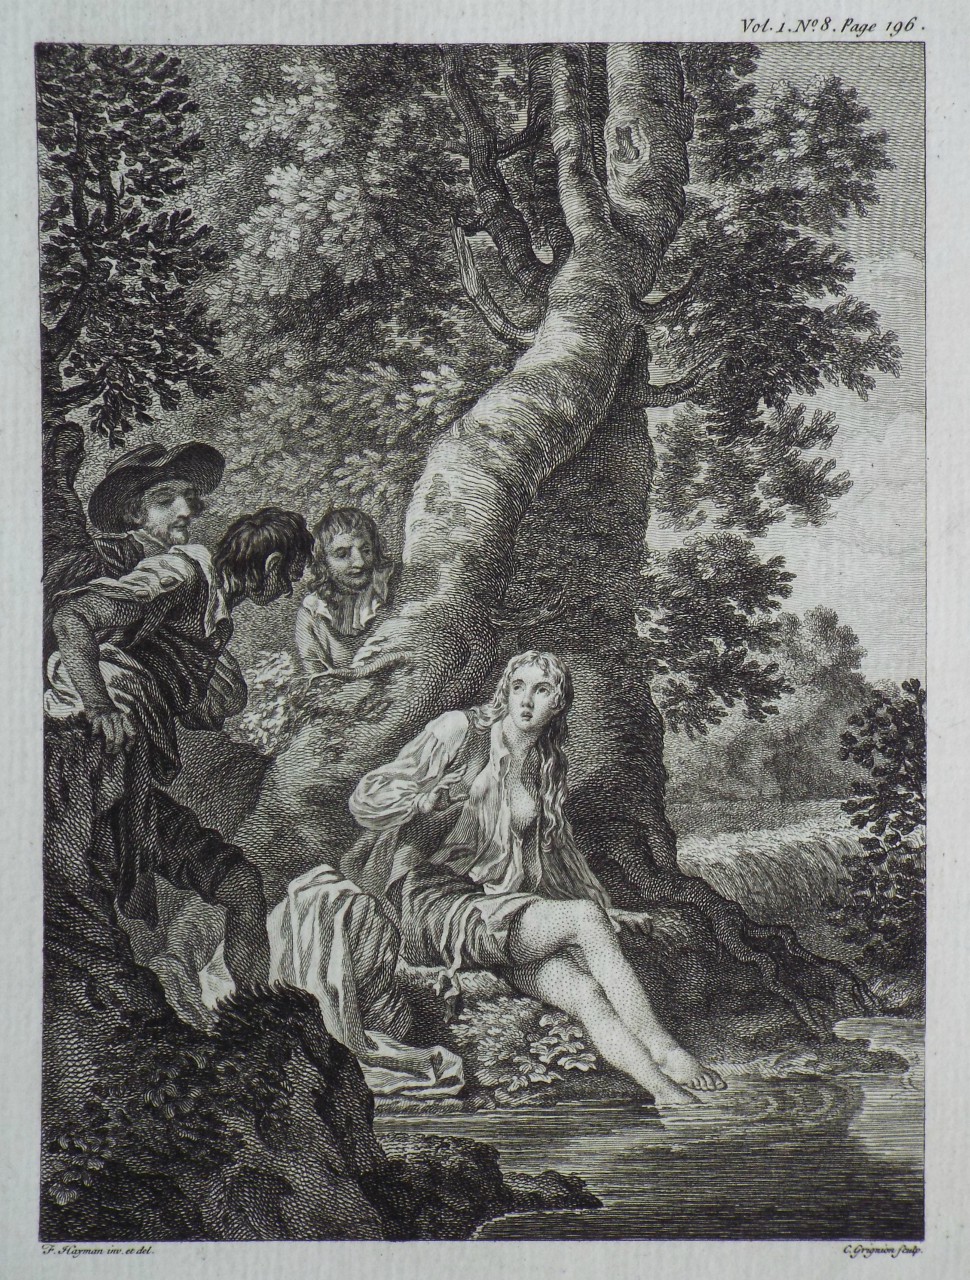 Print - (Young woman bathing in a river, disturbed by three men) - Grignion